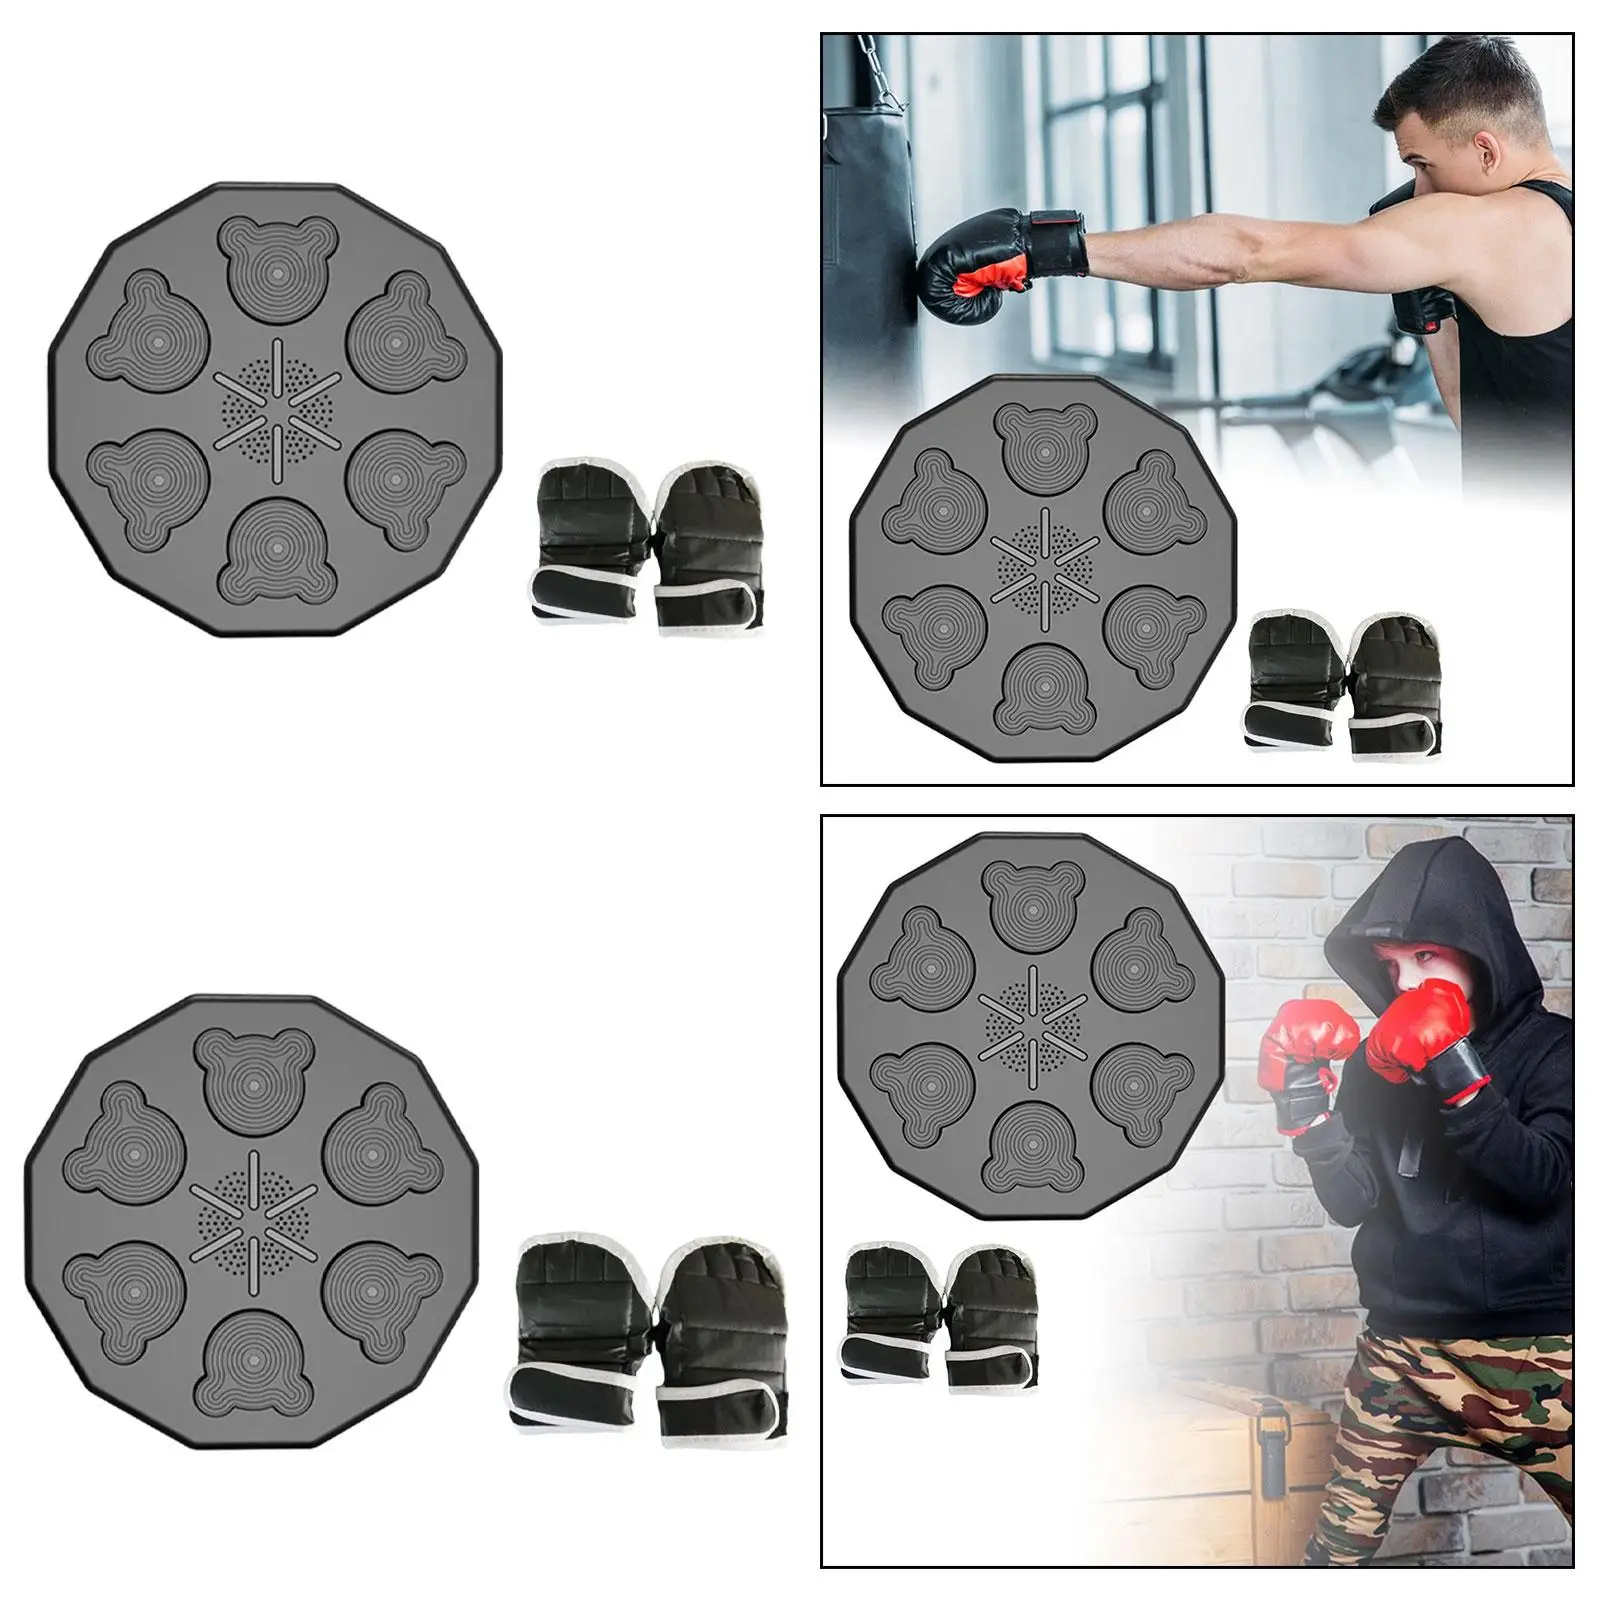 Music Boxing Training Machine with Boxing Gloves Electronic Boxing Wall Target for Sanda Martial Arts Taekwondo Indoor Sports